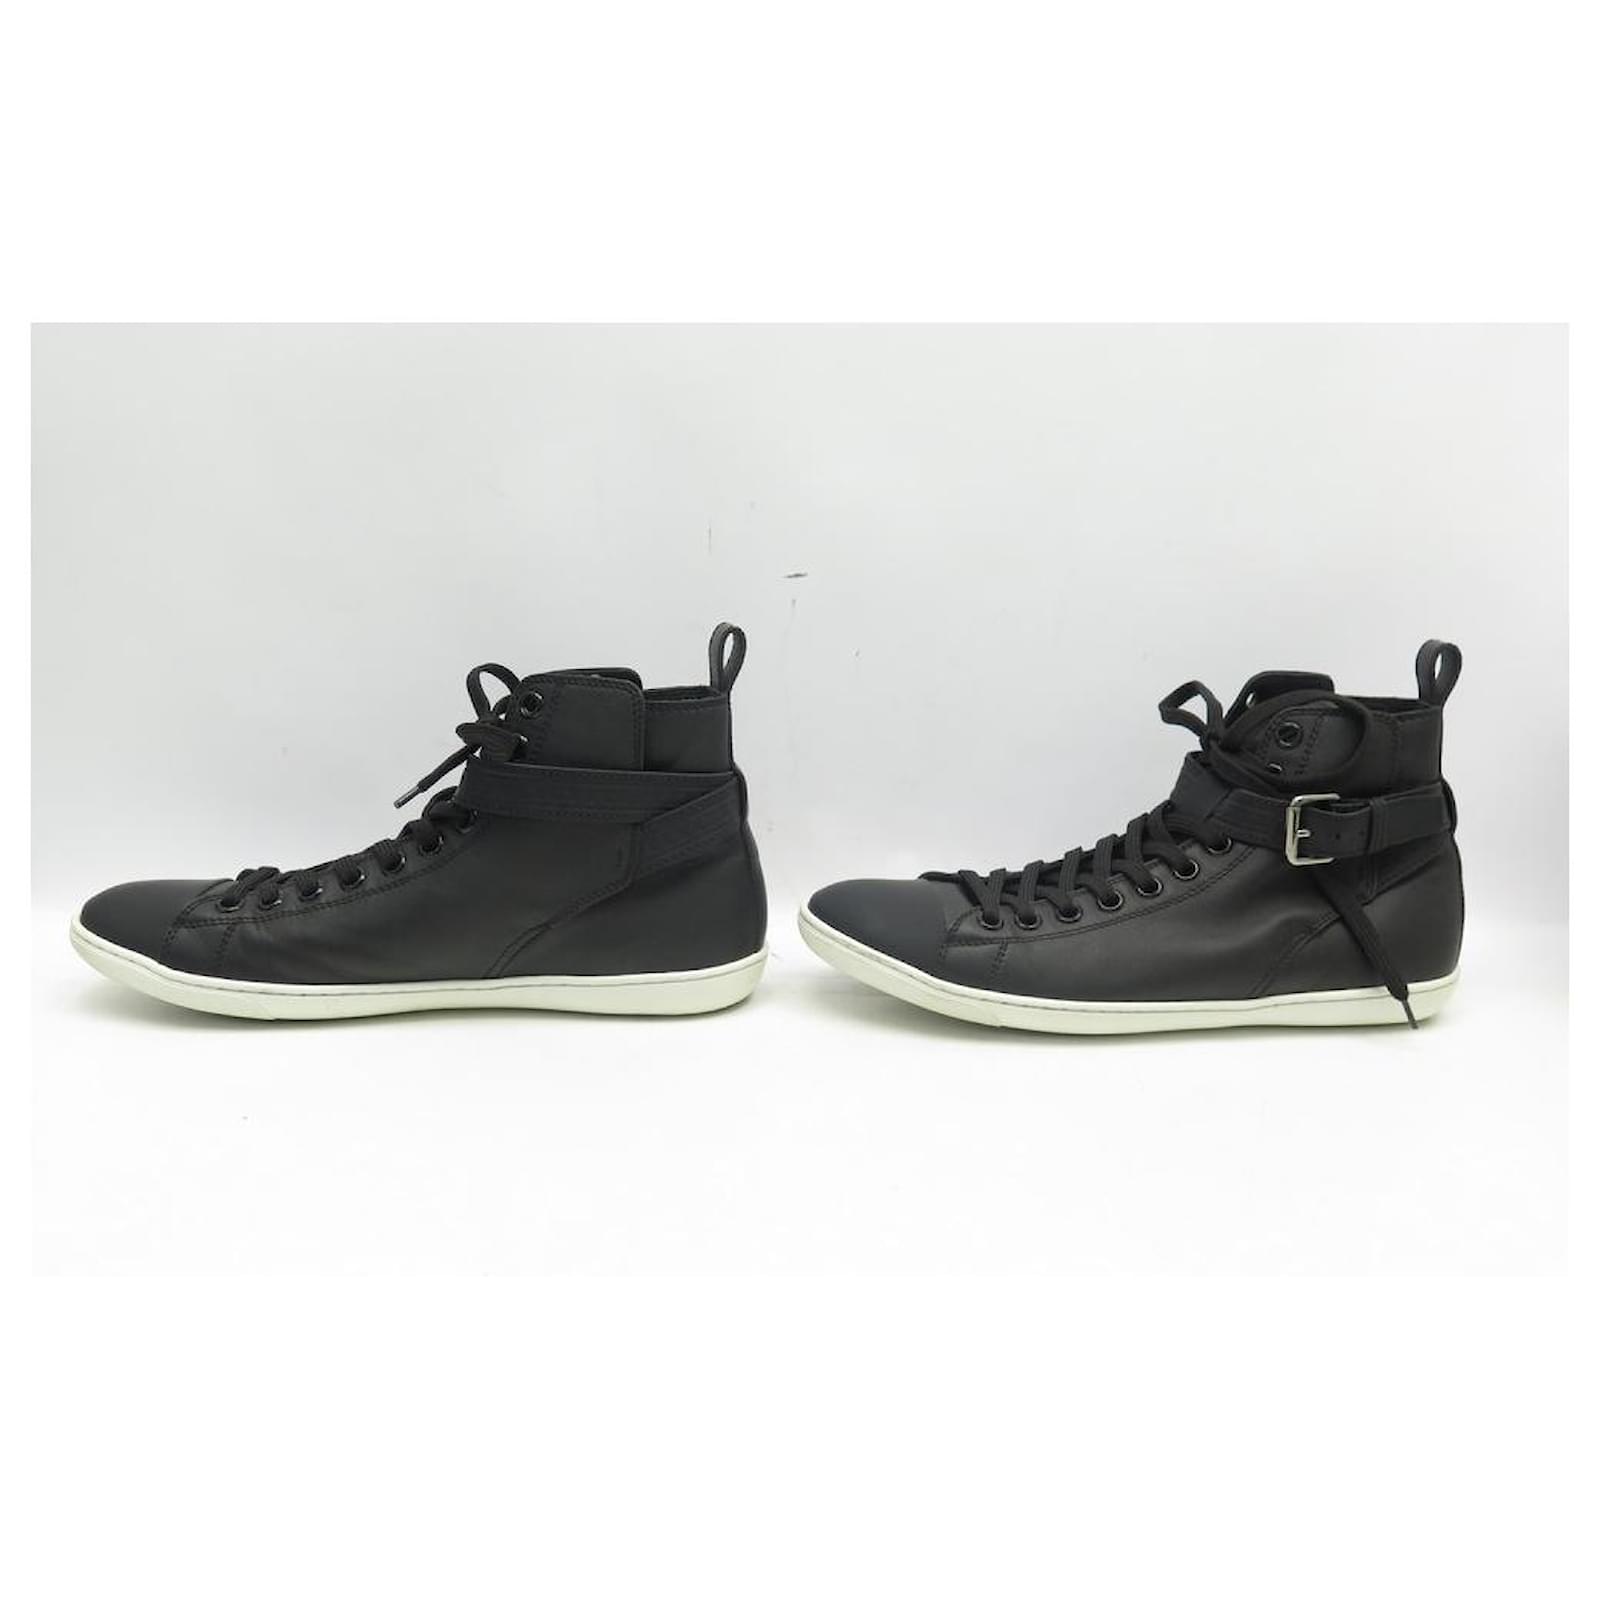 NEW LOUIS VUITTON FALCON HIGH TOP SNEAKERS SHOES 7 IT 42 LEATHER